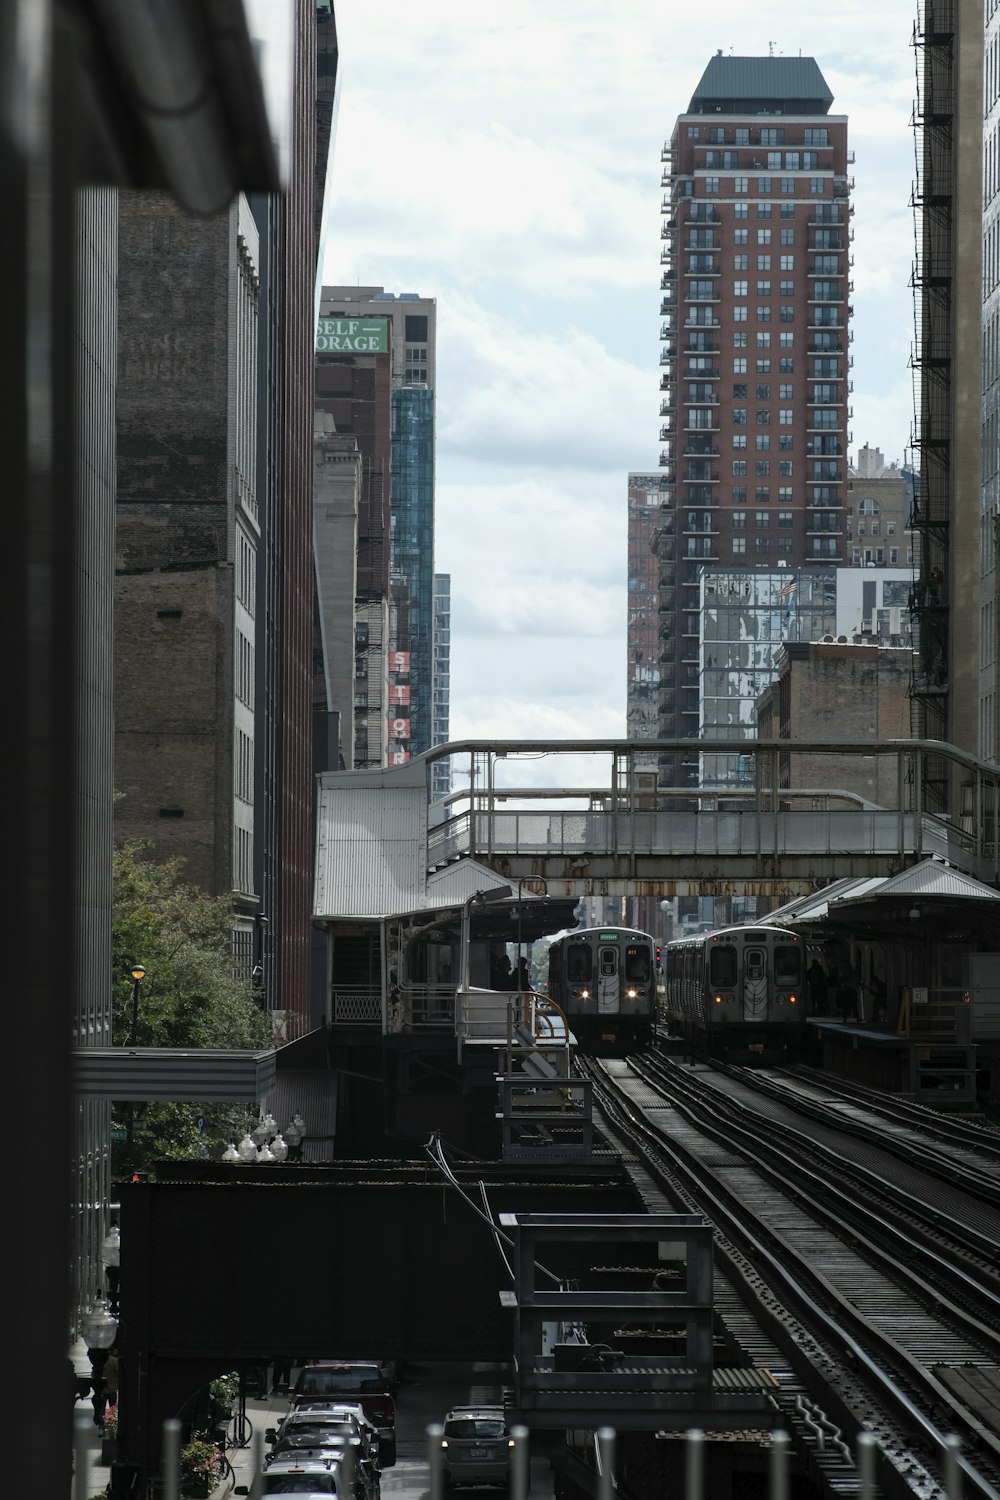 brown train on rail near high rise building during daytime